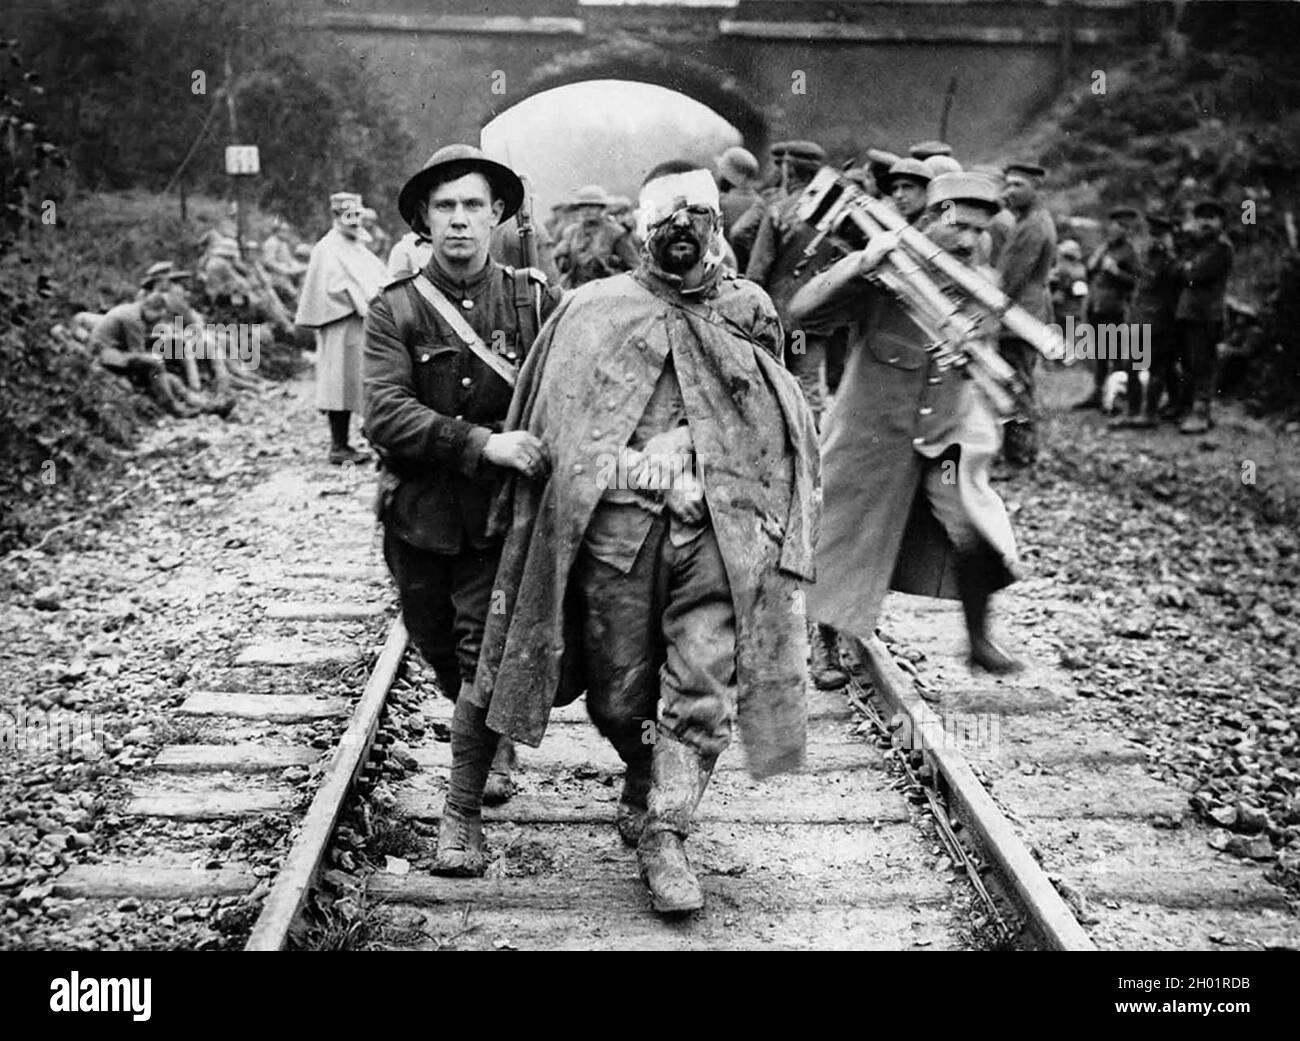 A German prisoner, wounded and muddy, helped by a British soldier along a railway track. Stock Photo